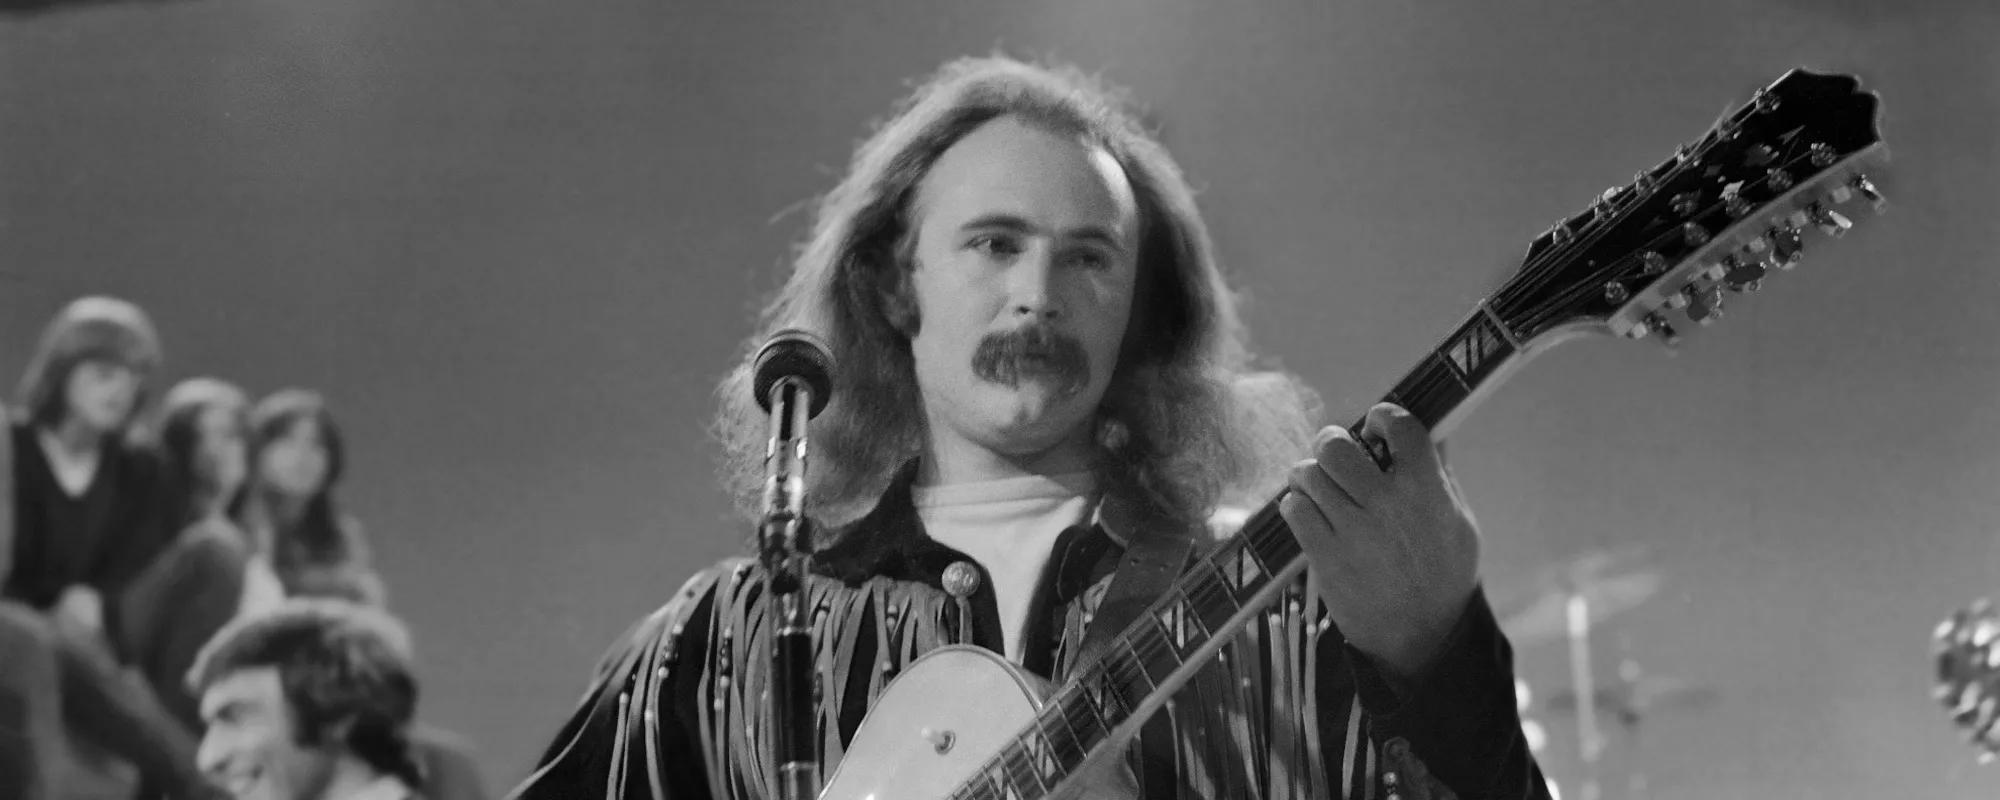 How George Harrison Inspired David Crosby’s 1971 Song “Laughing”